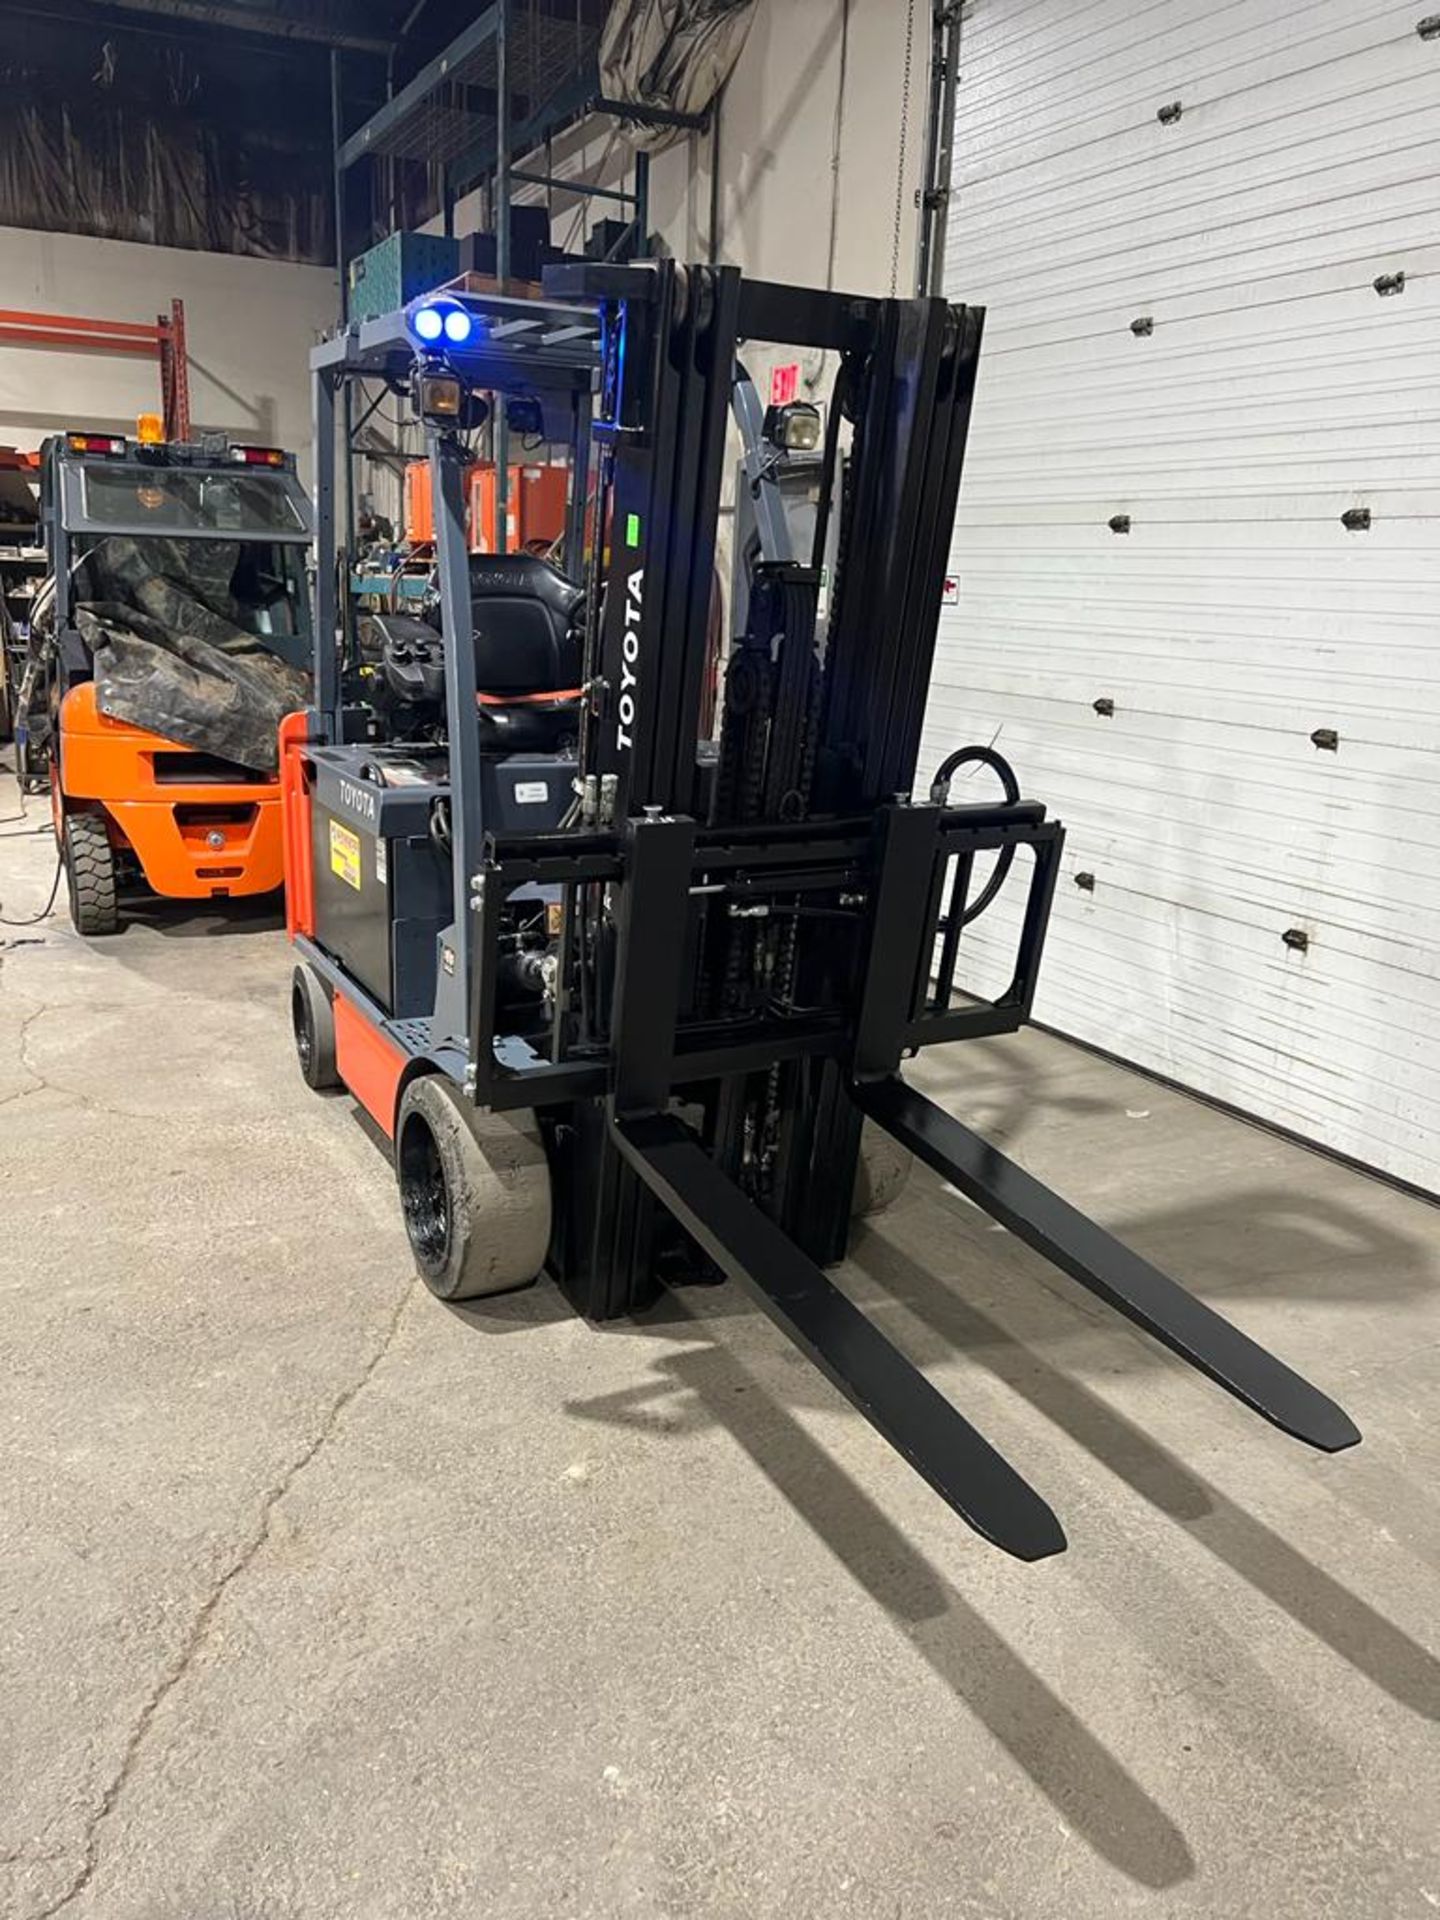 2015 Toyota 6,000lbs Capacity Electric Forklift with Sideshift & Plumbed for Fork Positioner - 48V - Image 2 of 5